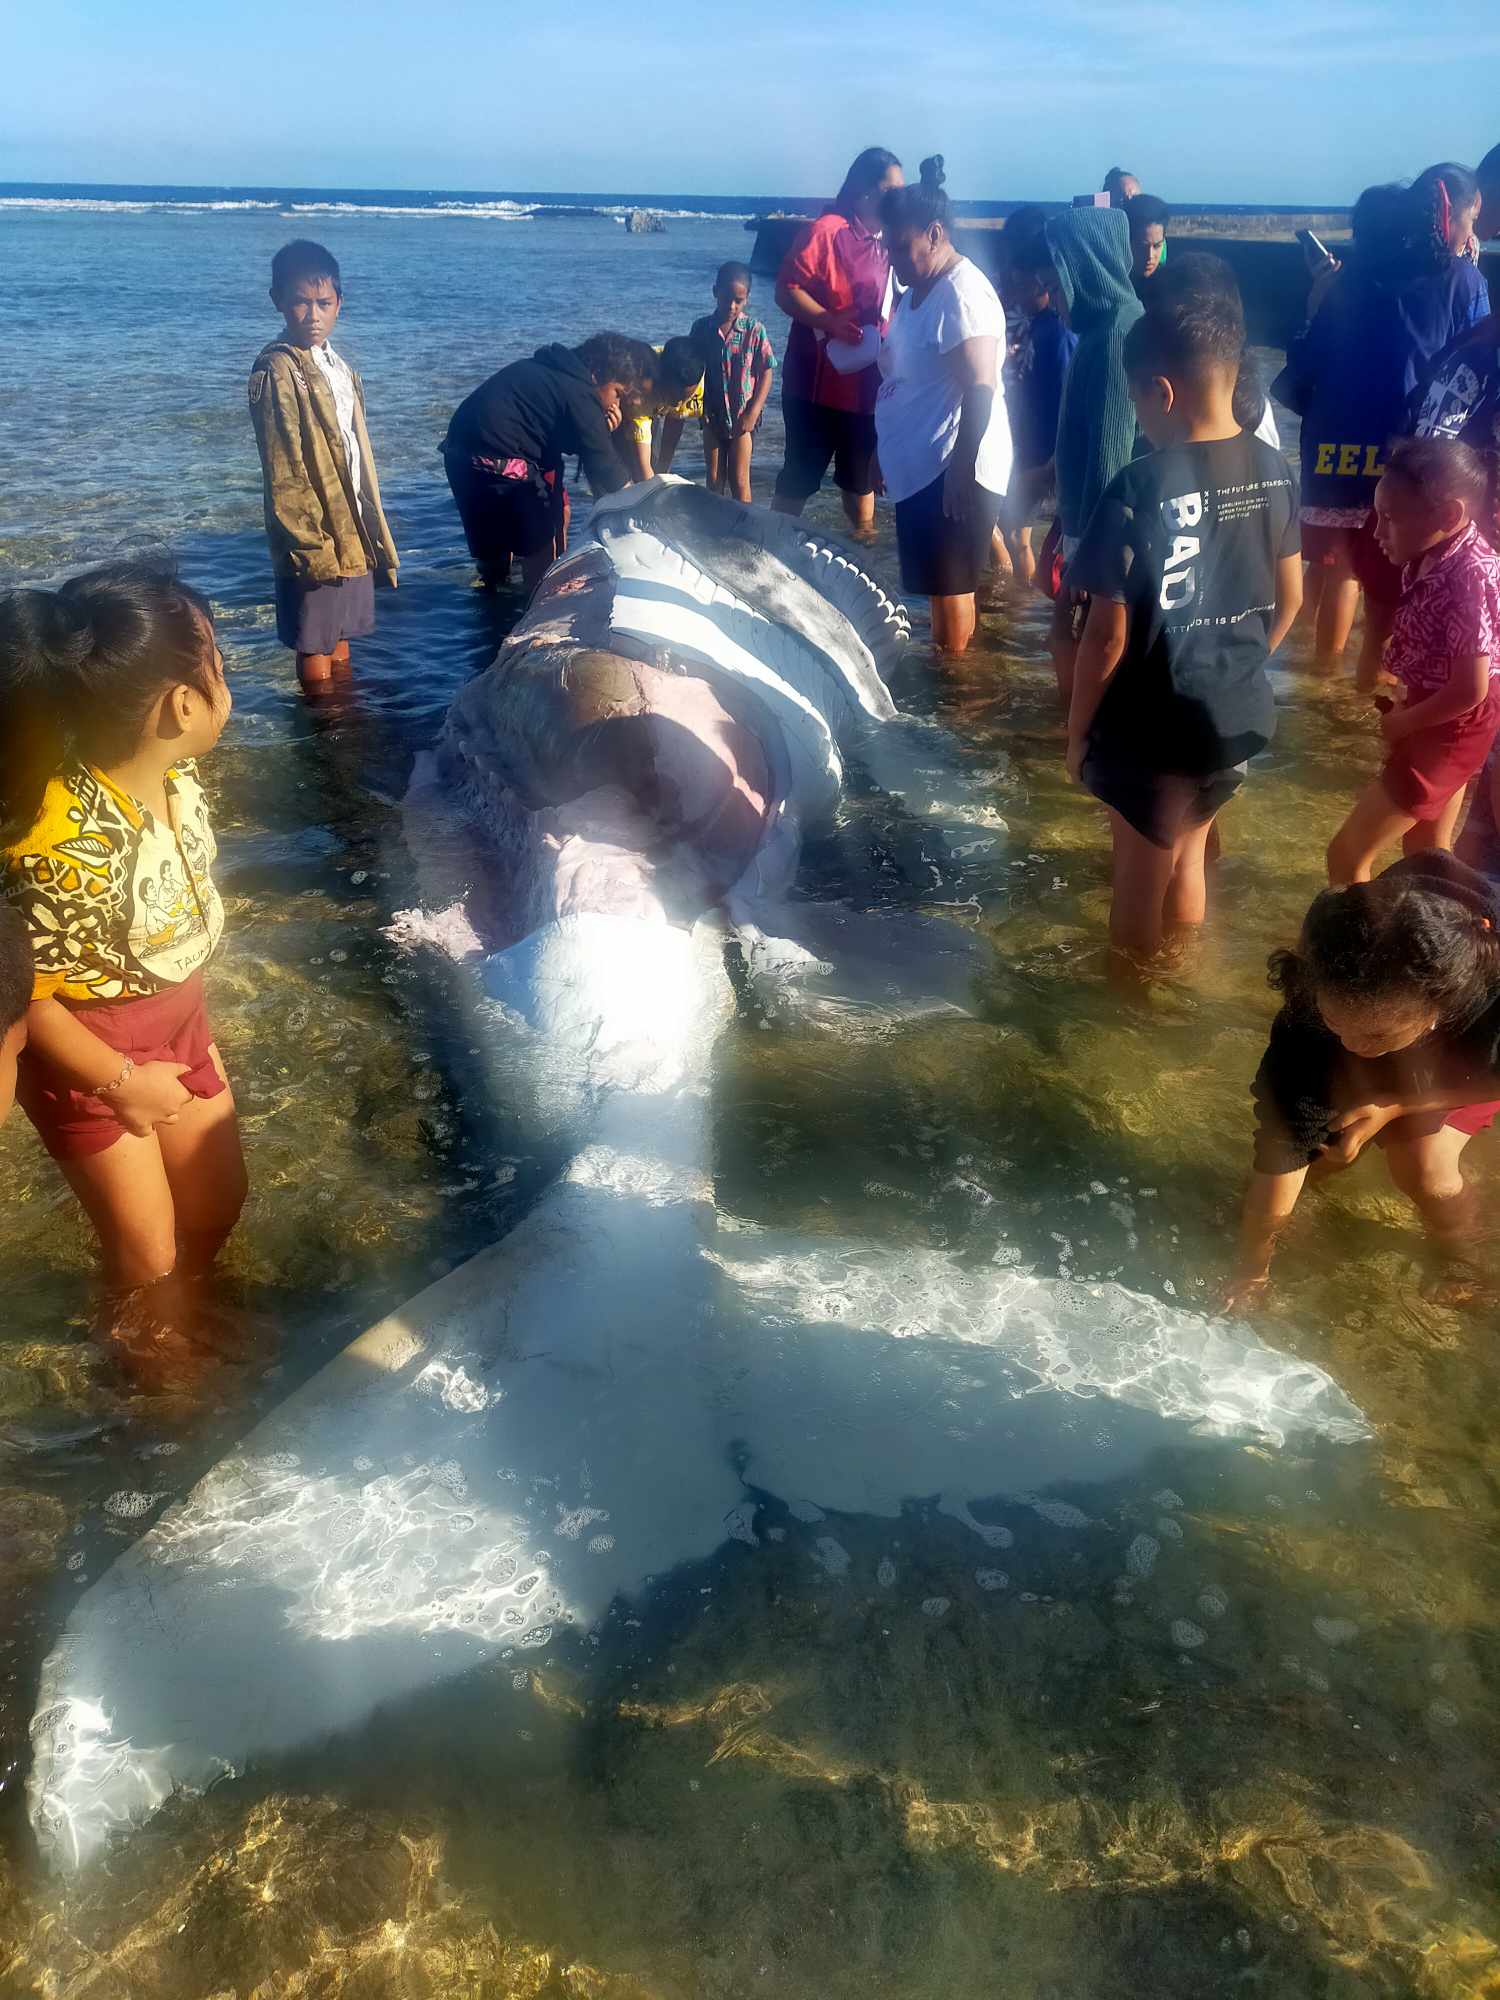 Dead baby whale washes ashore on Mangaia